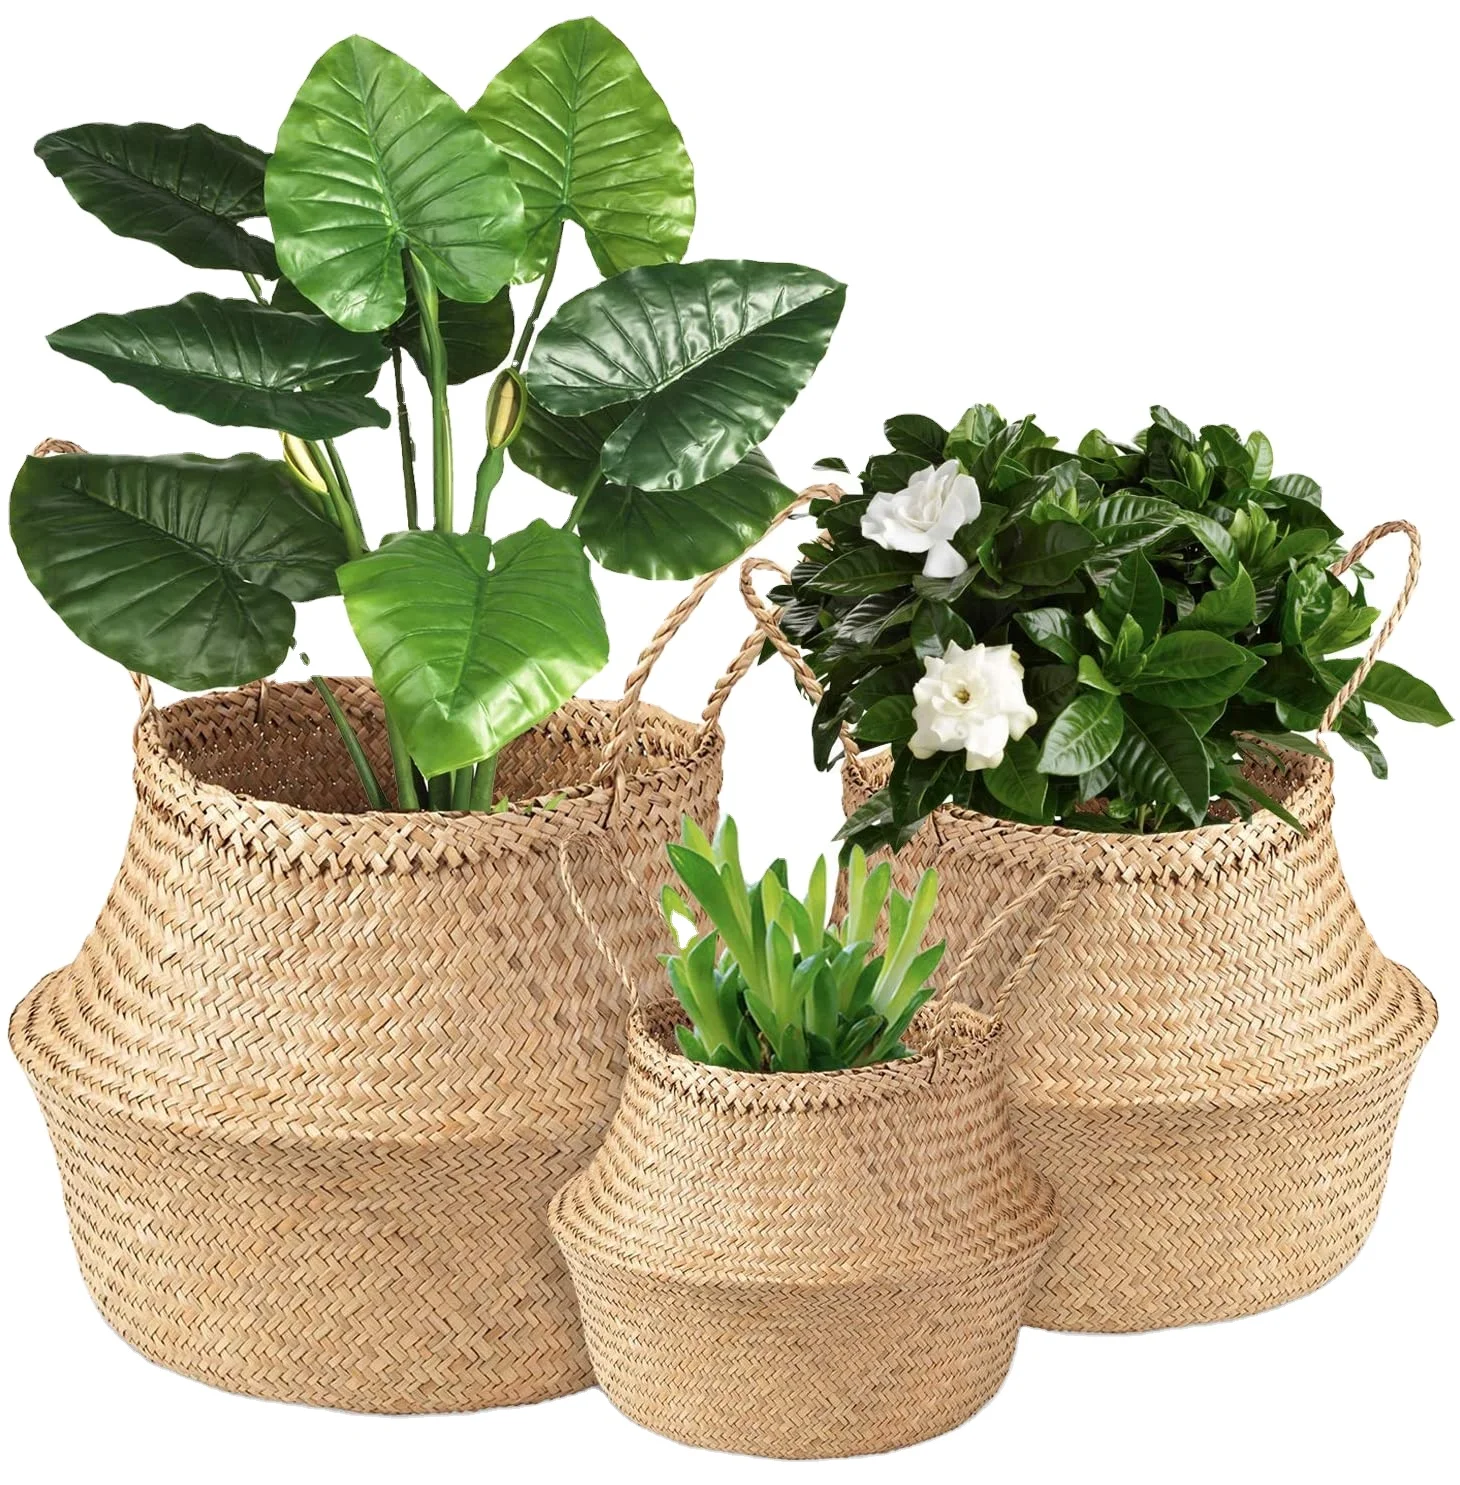 

Foldable Woven Seagrass Plant Basket with Handles Ideal for Storage Plant Pot Basket Laundry Picnic Plant Pot Cover Beach Bag, Natural